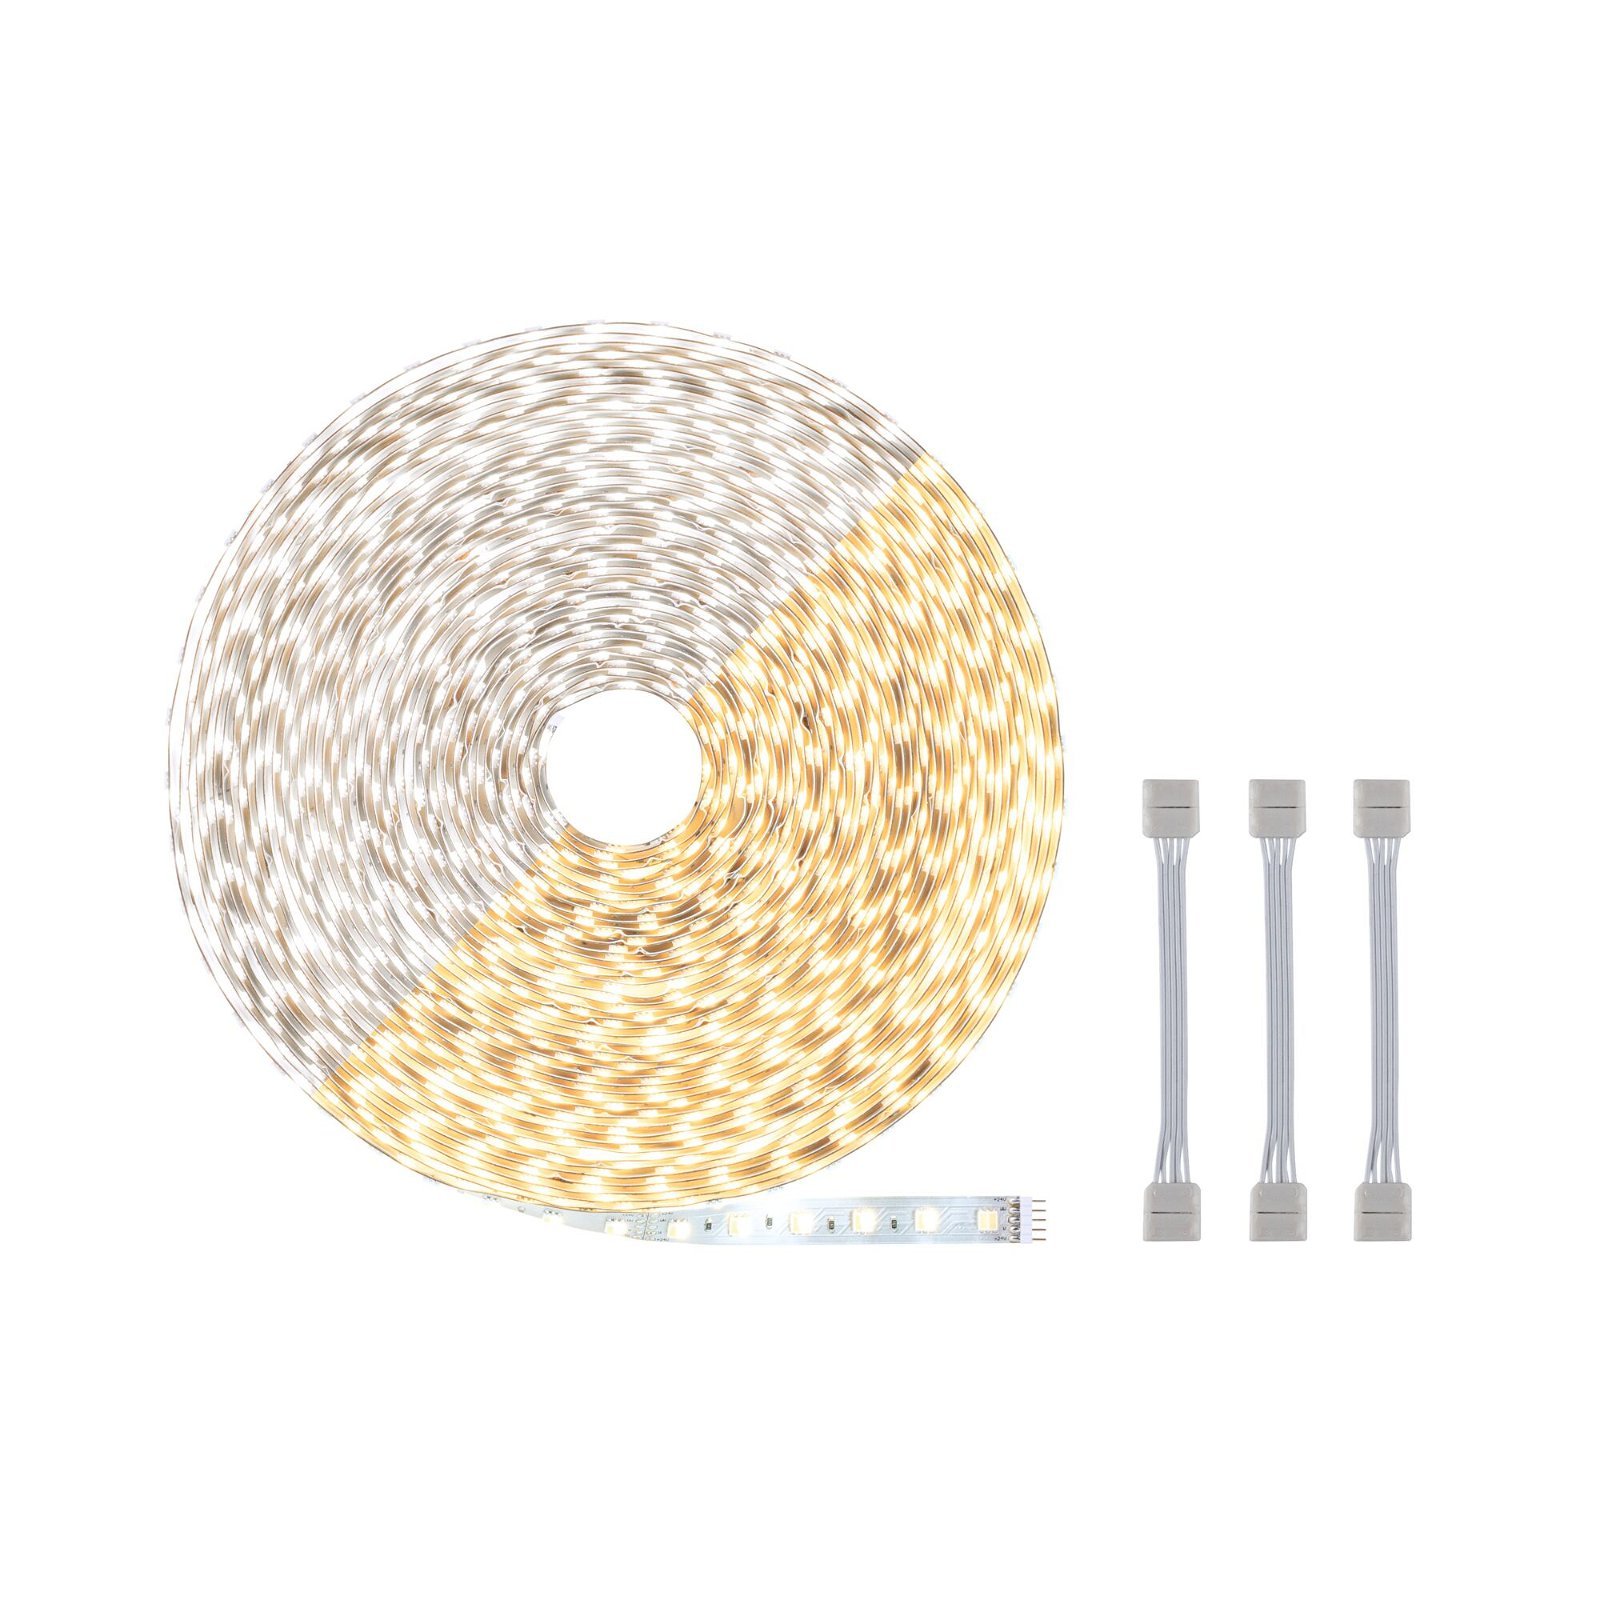 MaxLED 500 LED Strip Tunable White Individual strip incl. adapter cable 20m 72W 550lm/m 60 LEDs/m Tunable White